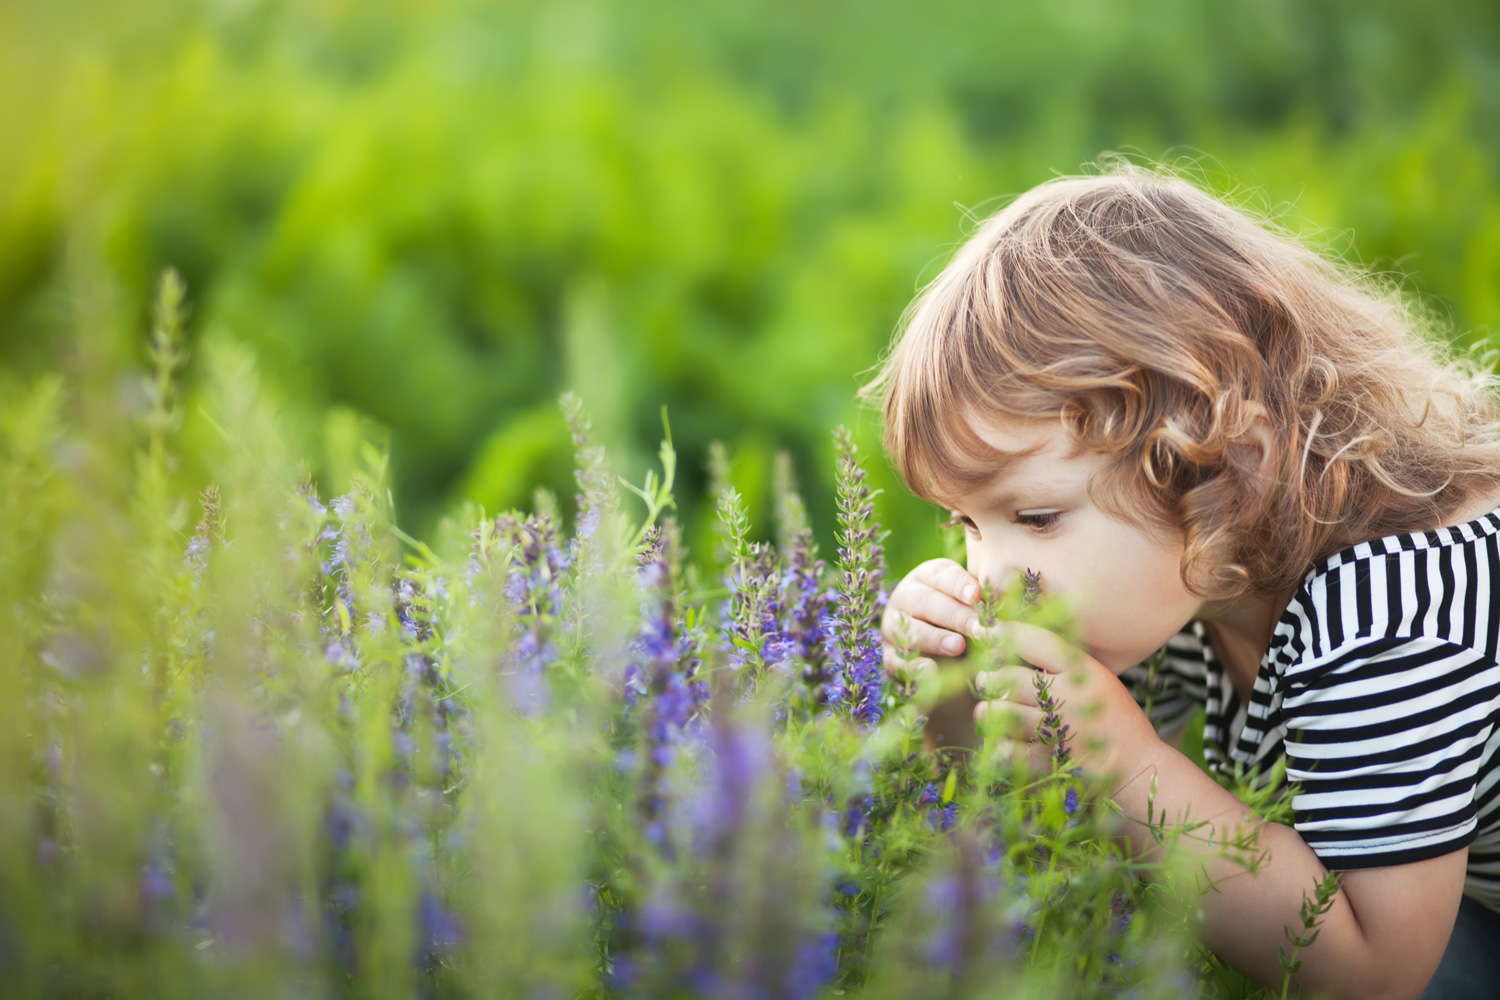 Cute little toddler girl smelling purple flowers. Provence consept